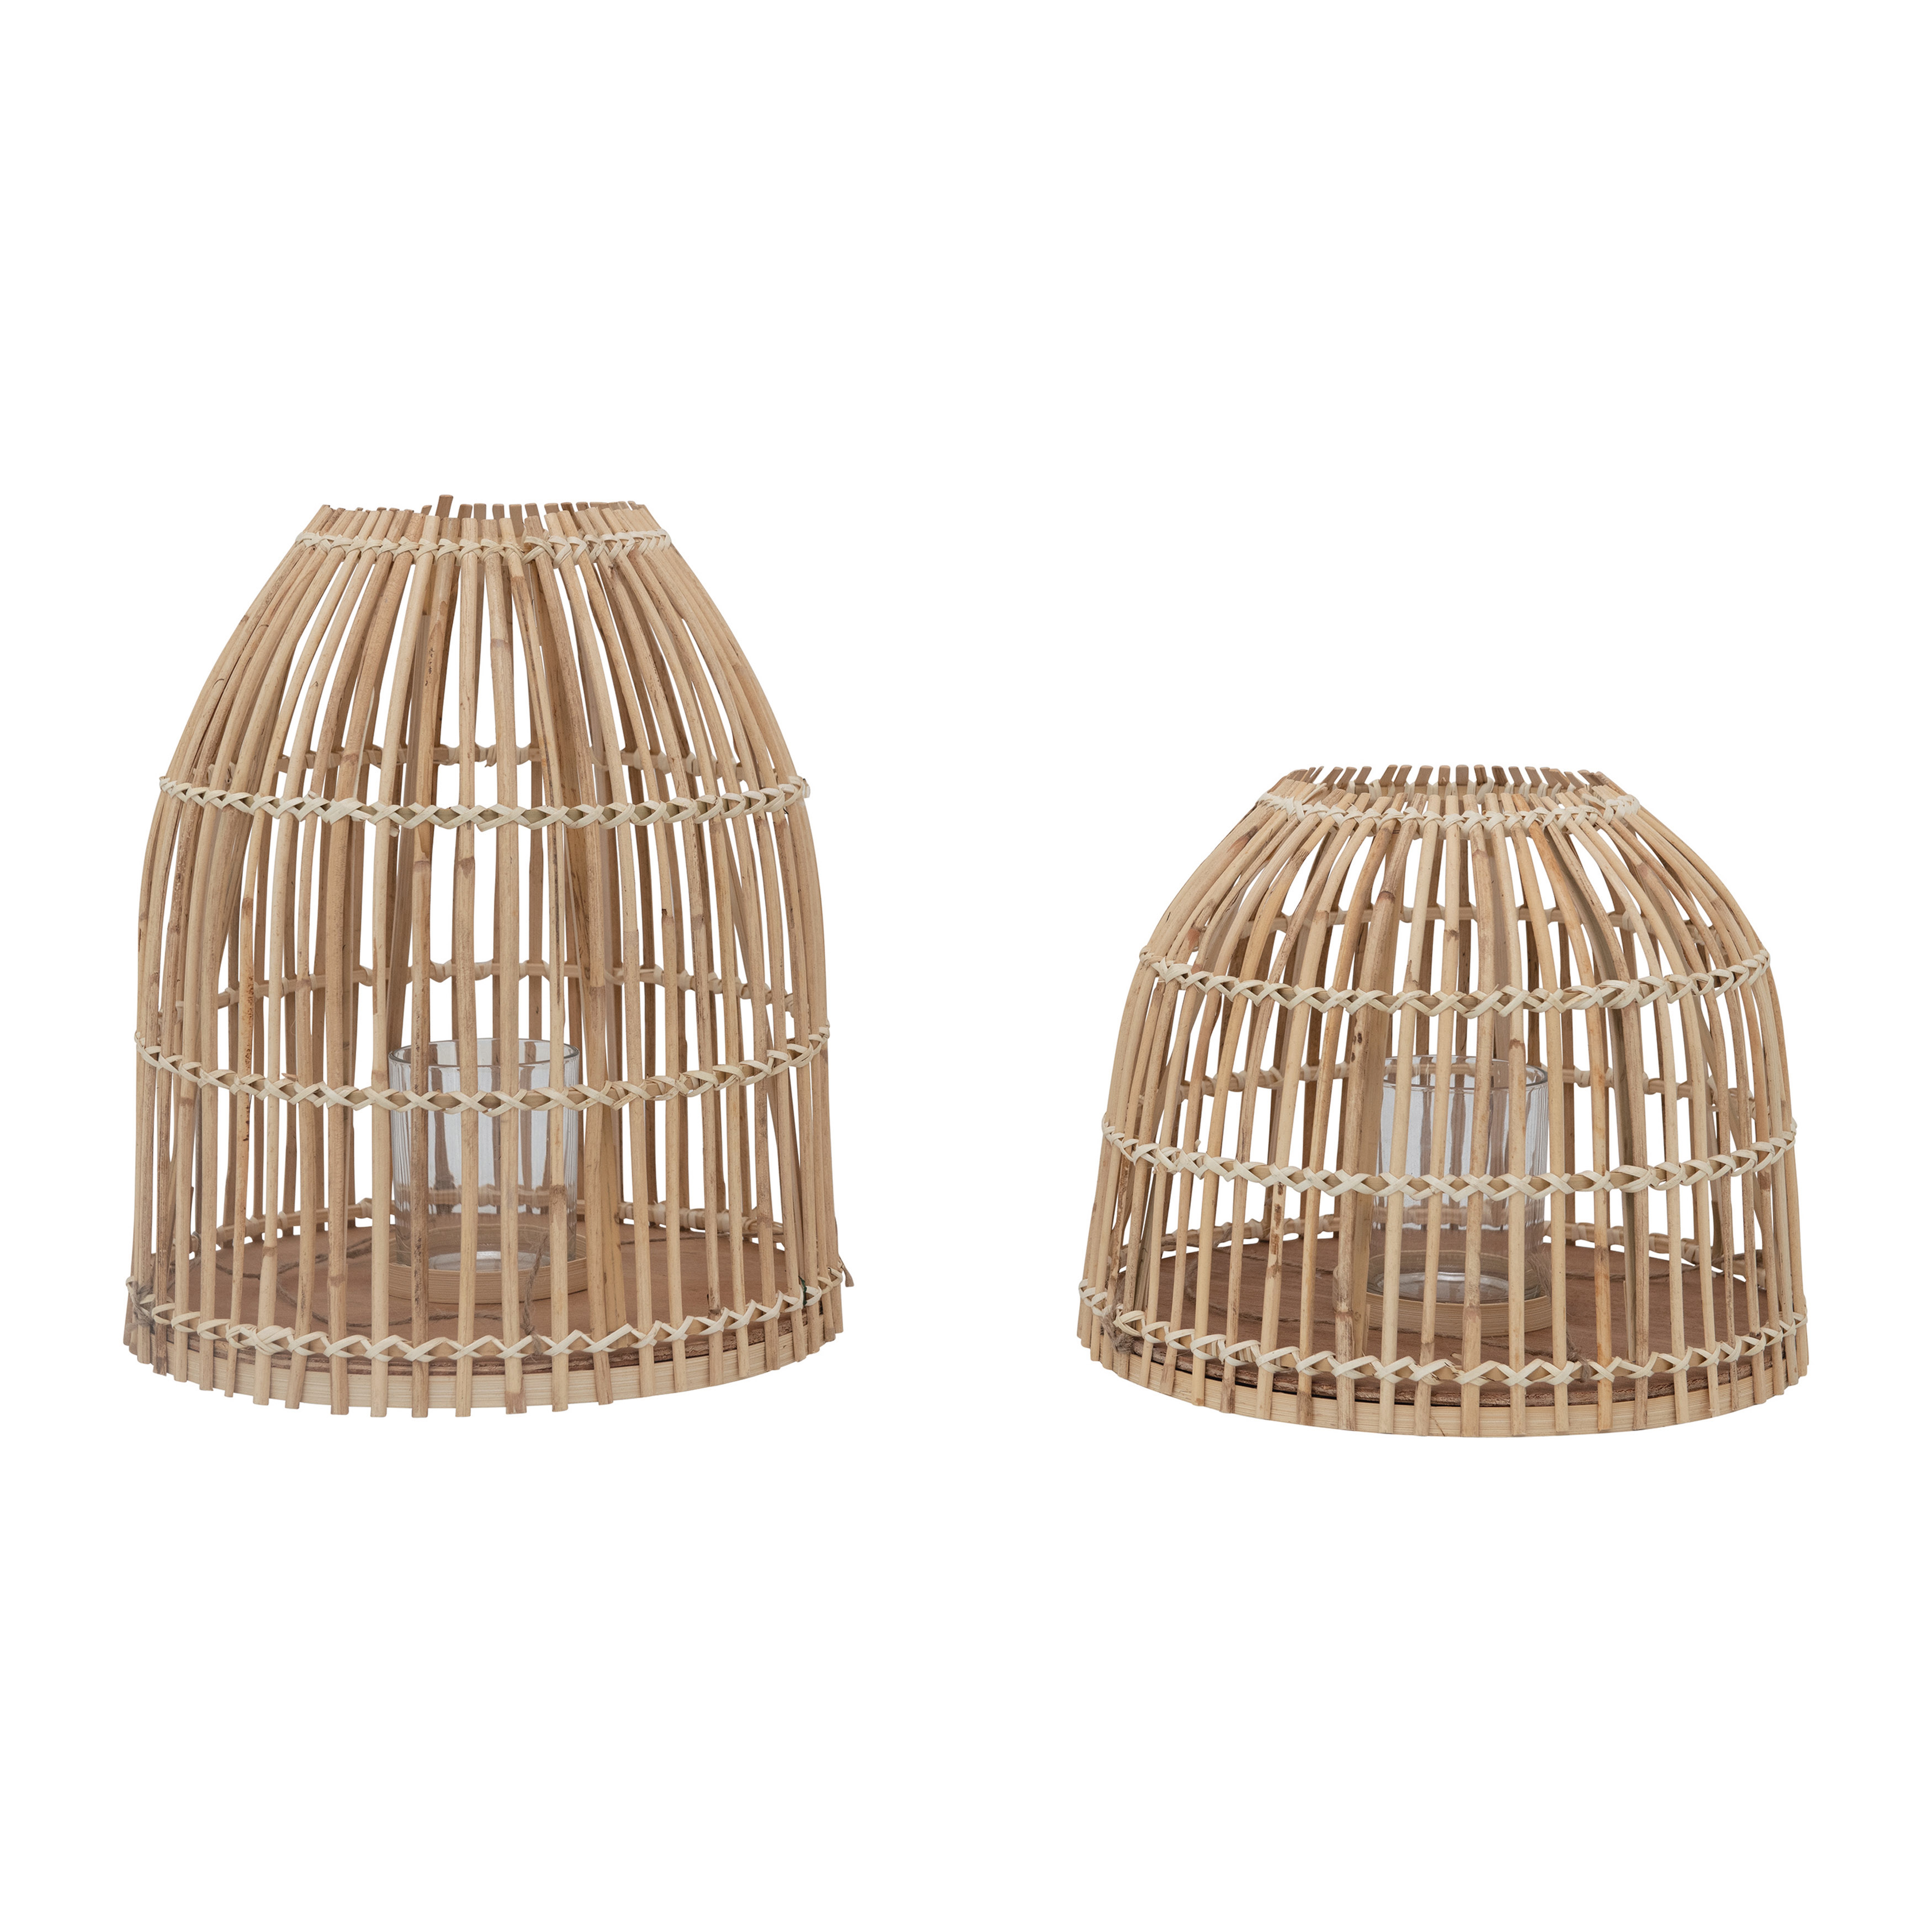 Bamboo Lanterns with Glass Inserts, Set of 2 Sizes - Nomad Home